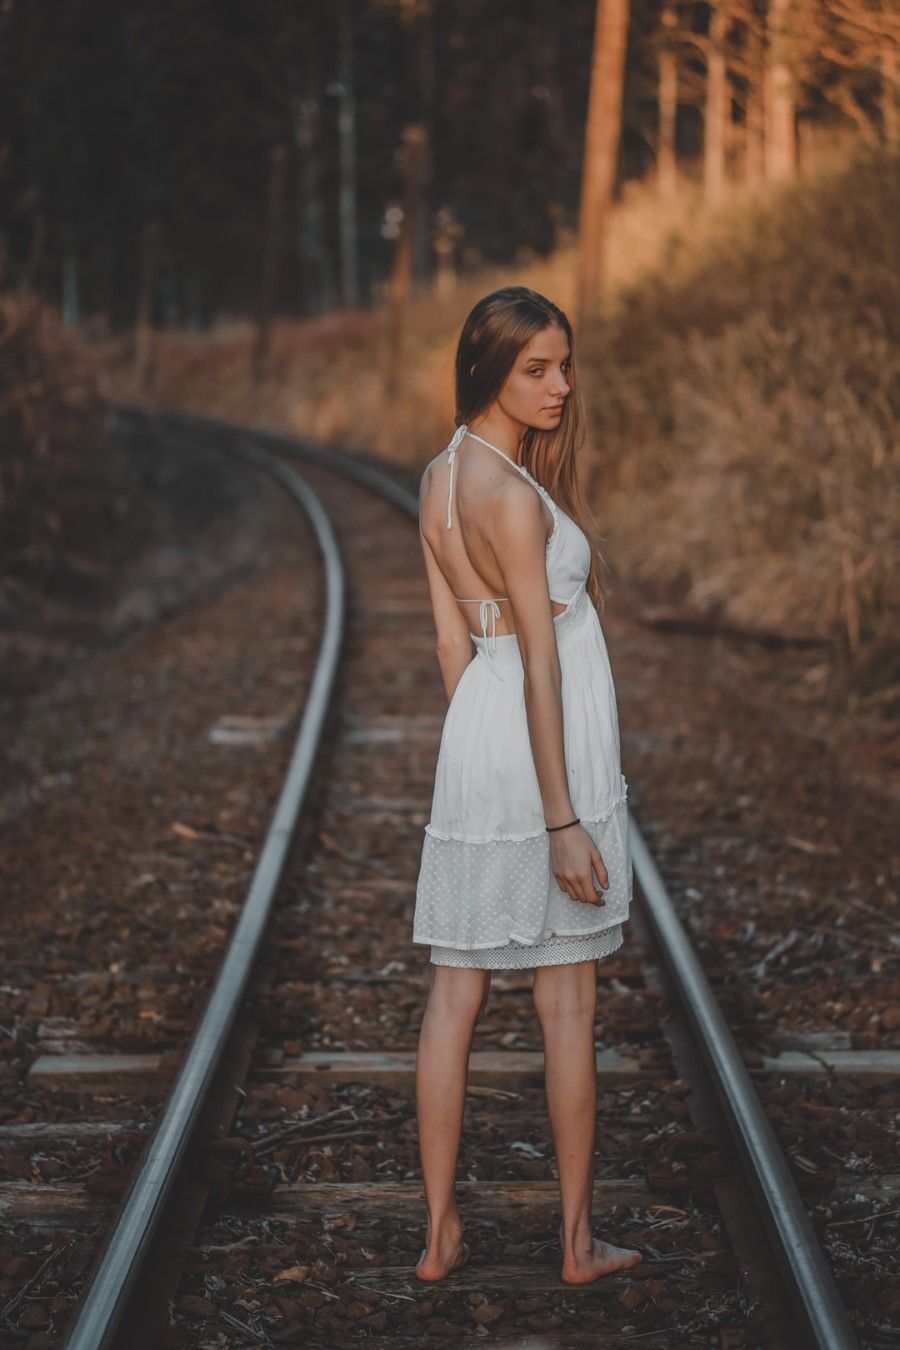 woman-standing-on-train-rail-near-outdoor-during-daytime